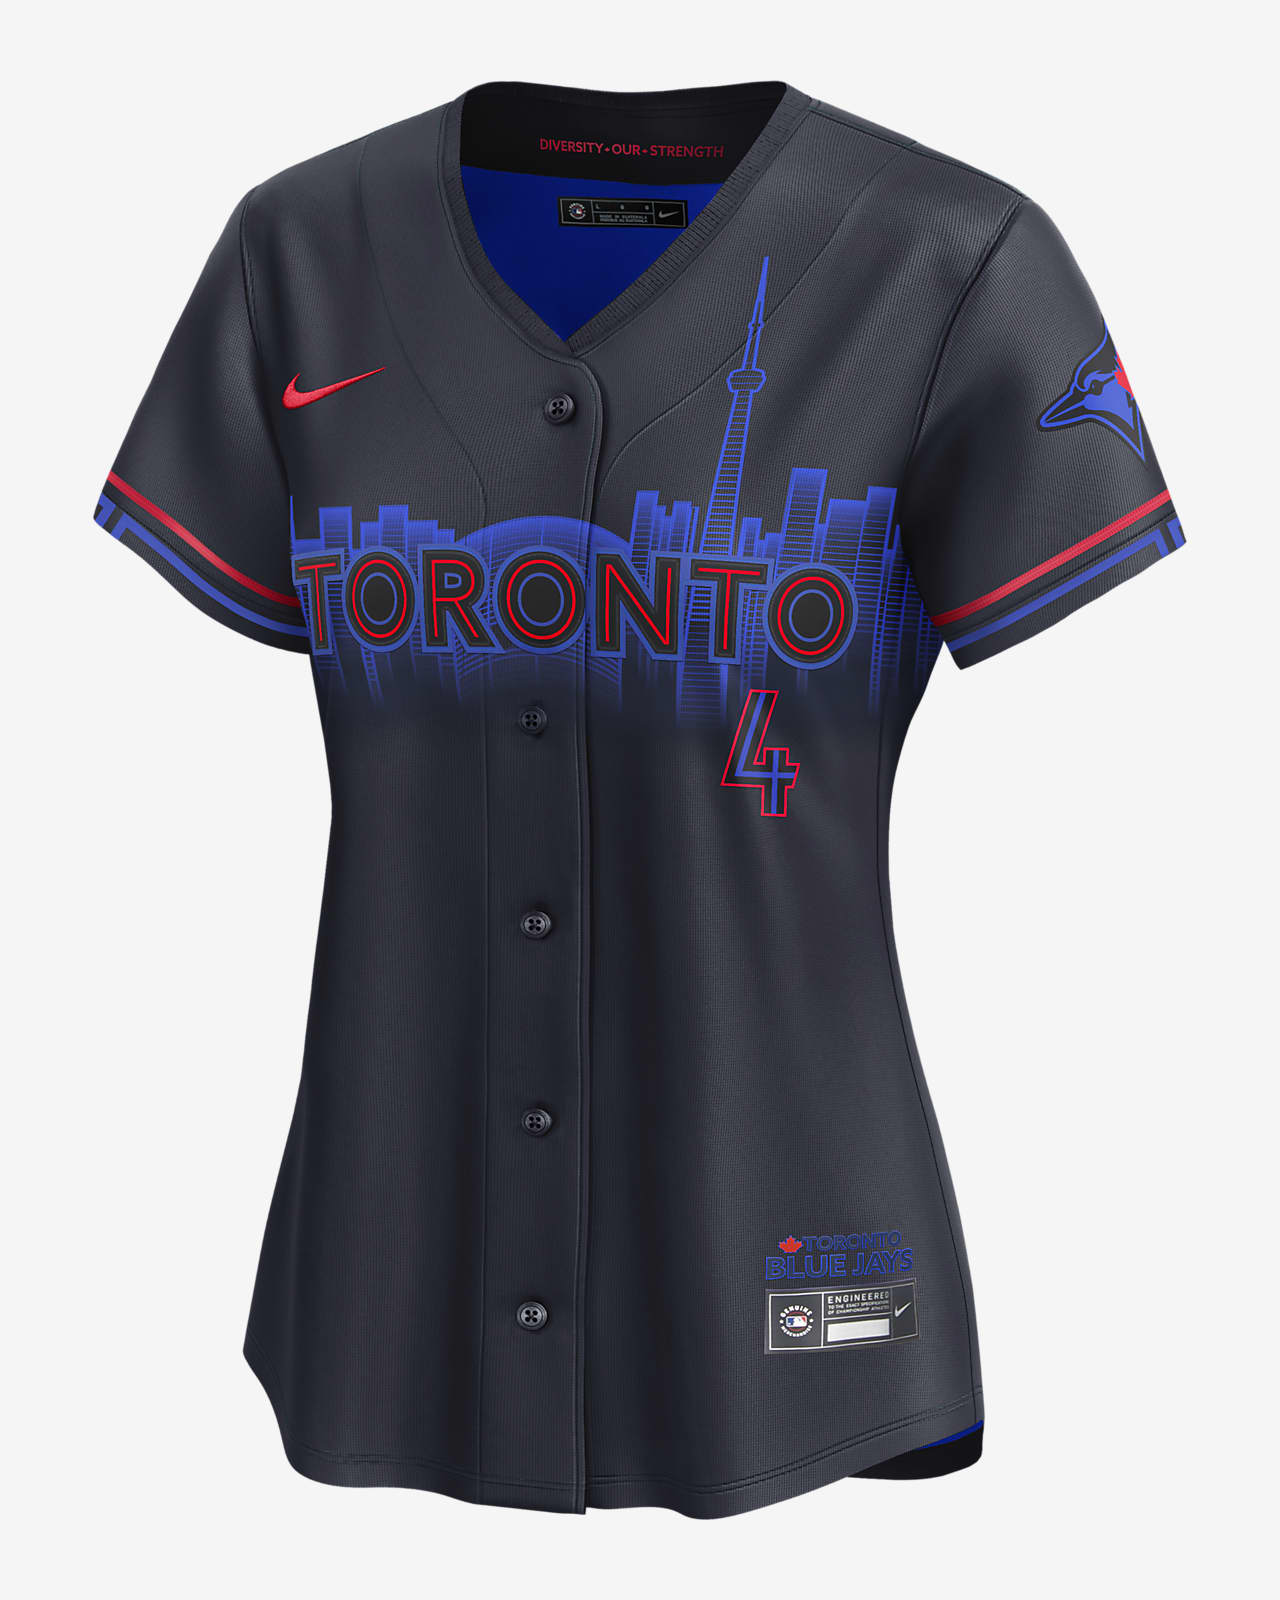 George Springer Toronto Blue Jays City Connect Women's Nike Dri-FIT ADV MLB Limited Jersey